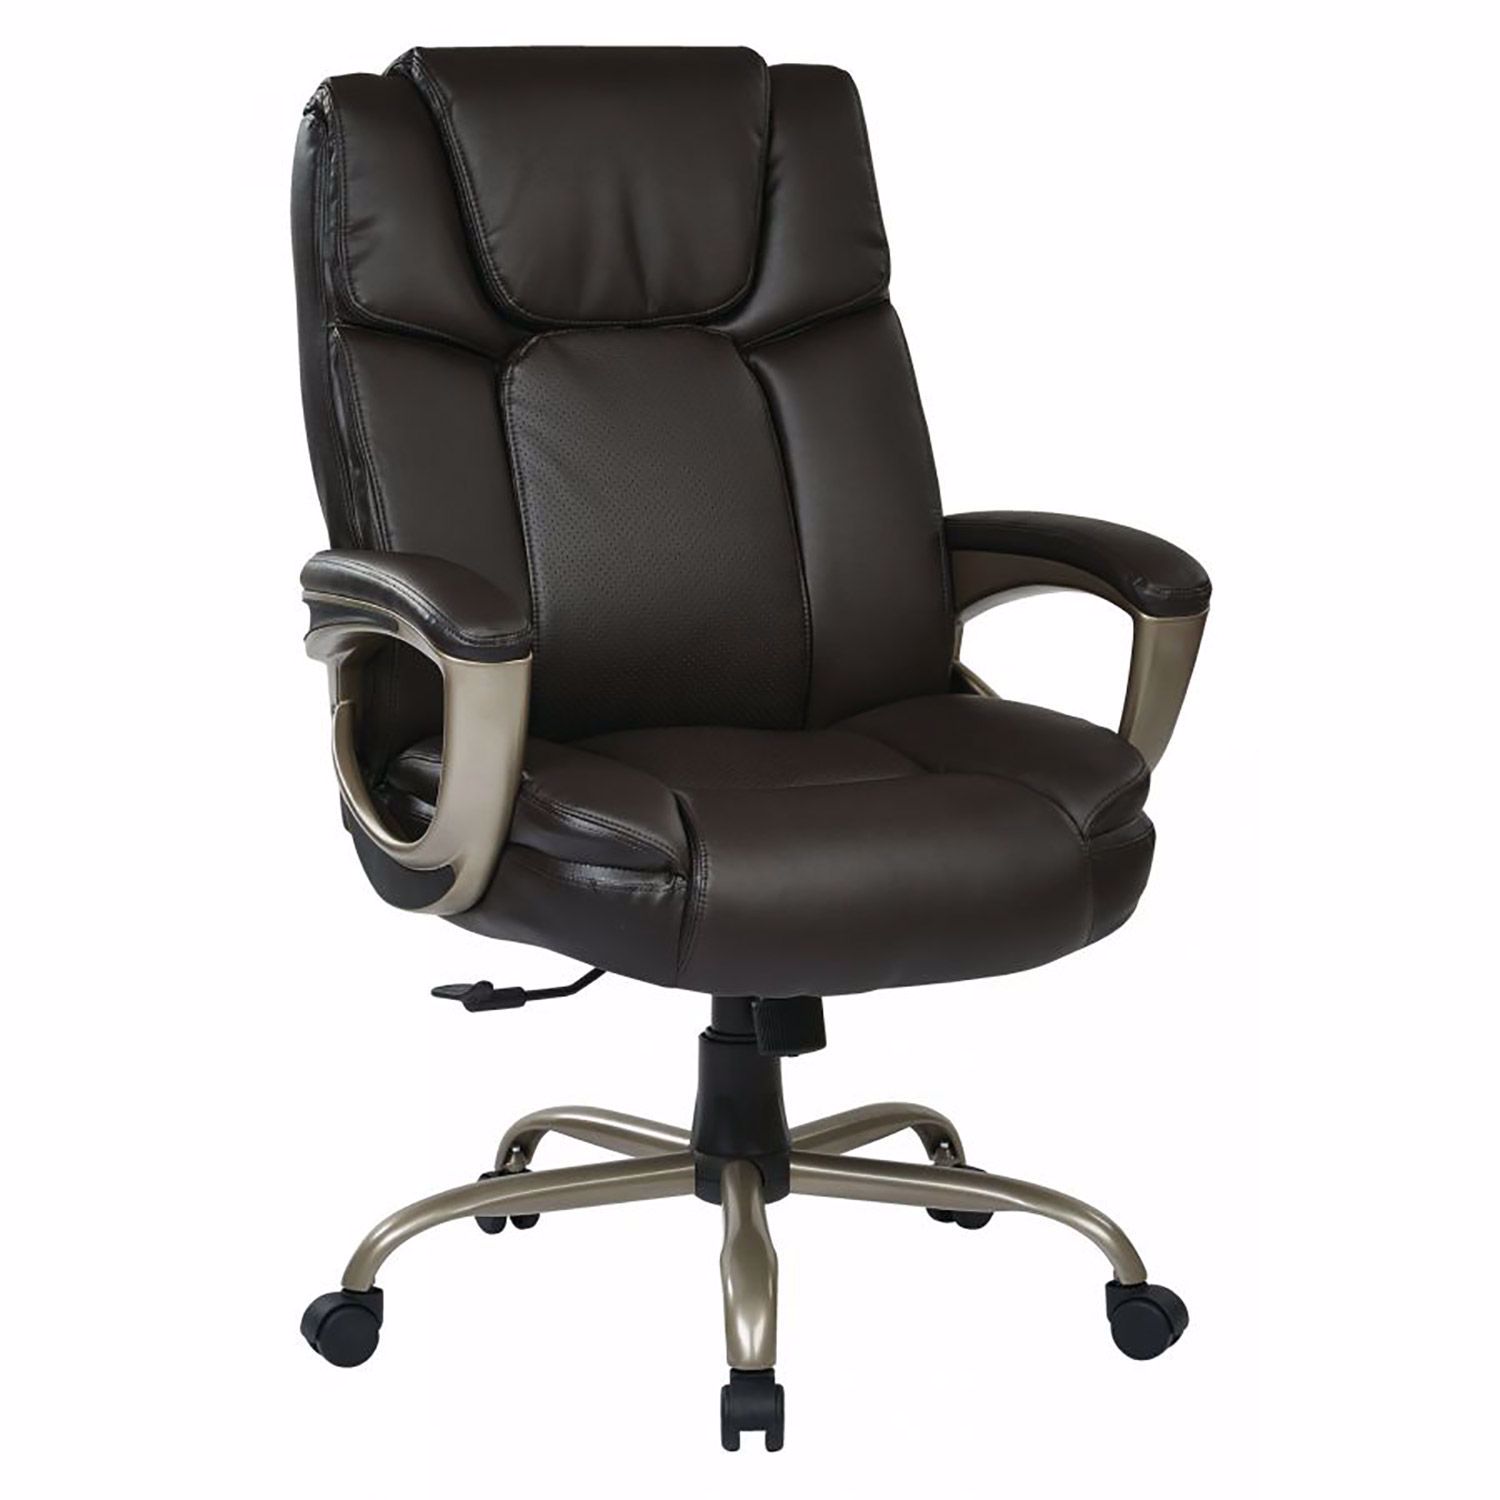 Comfty Lumbar Support and Chrome Base Leather Office Chair, 37.6, 41.53, Black